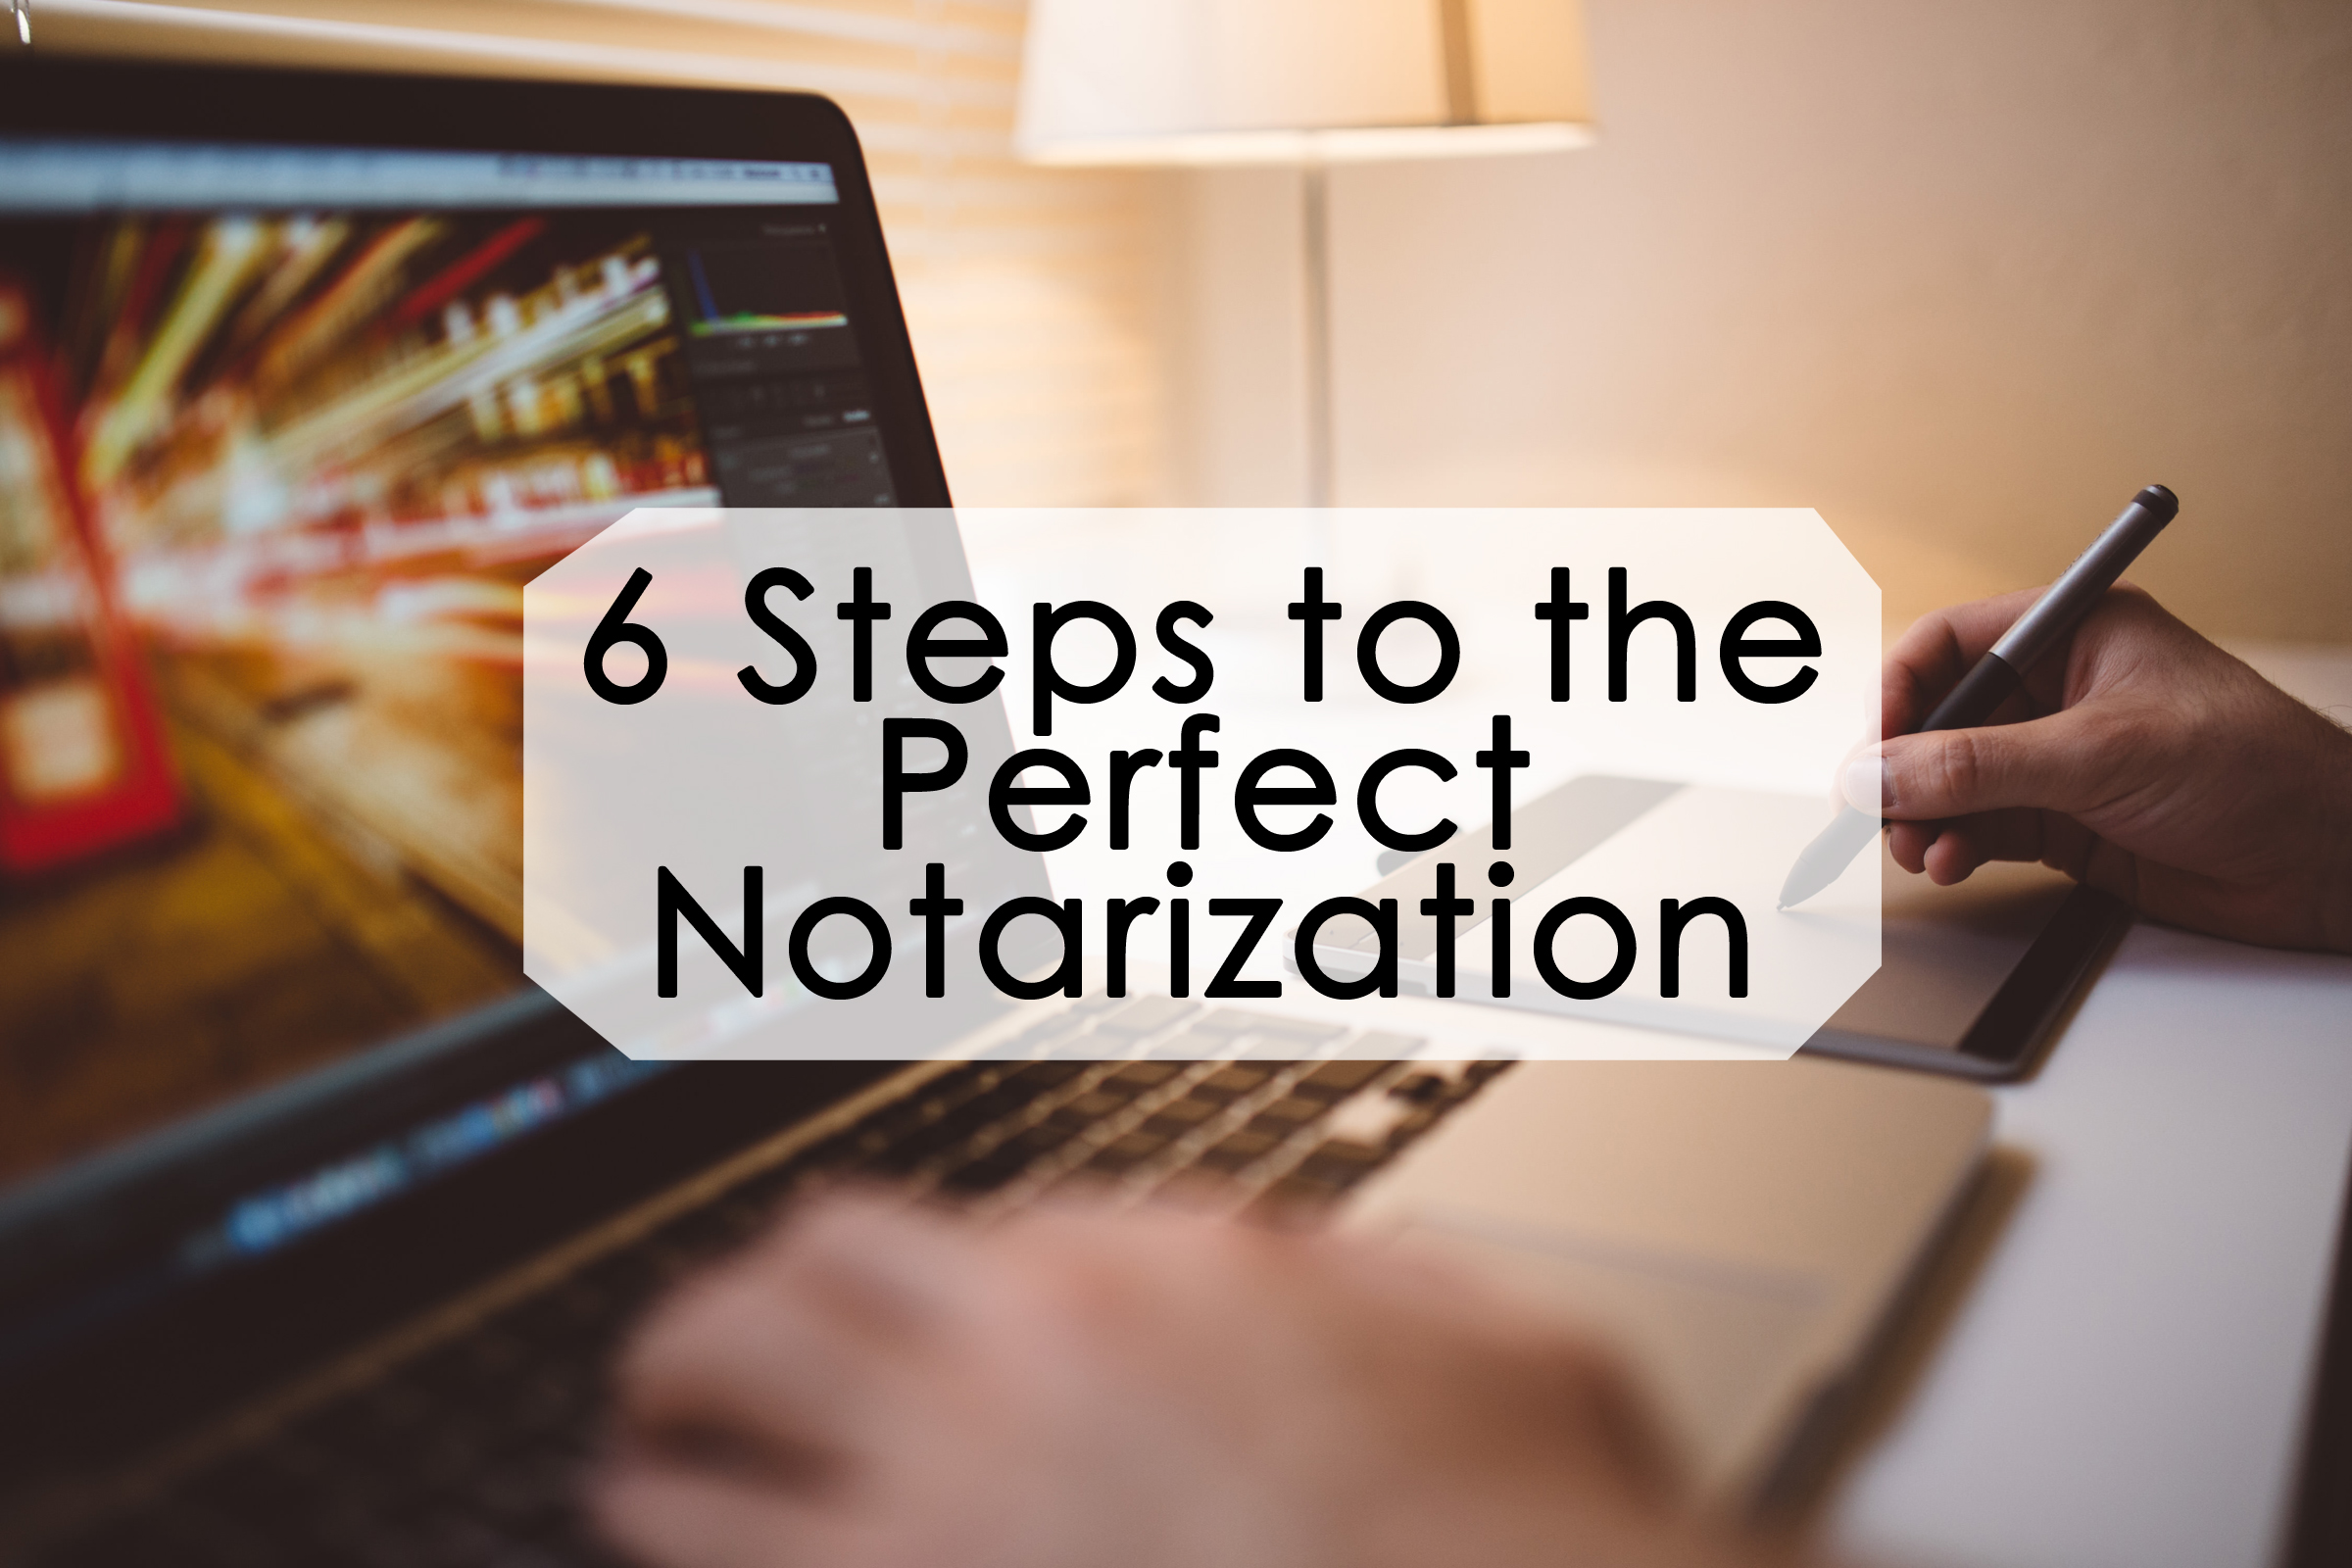 The 6 Steps to a Perfect Notarization